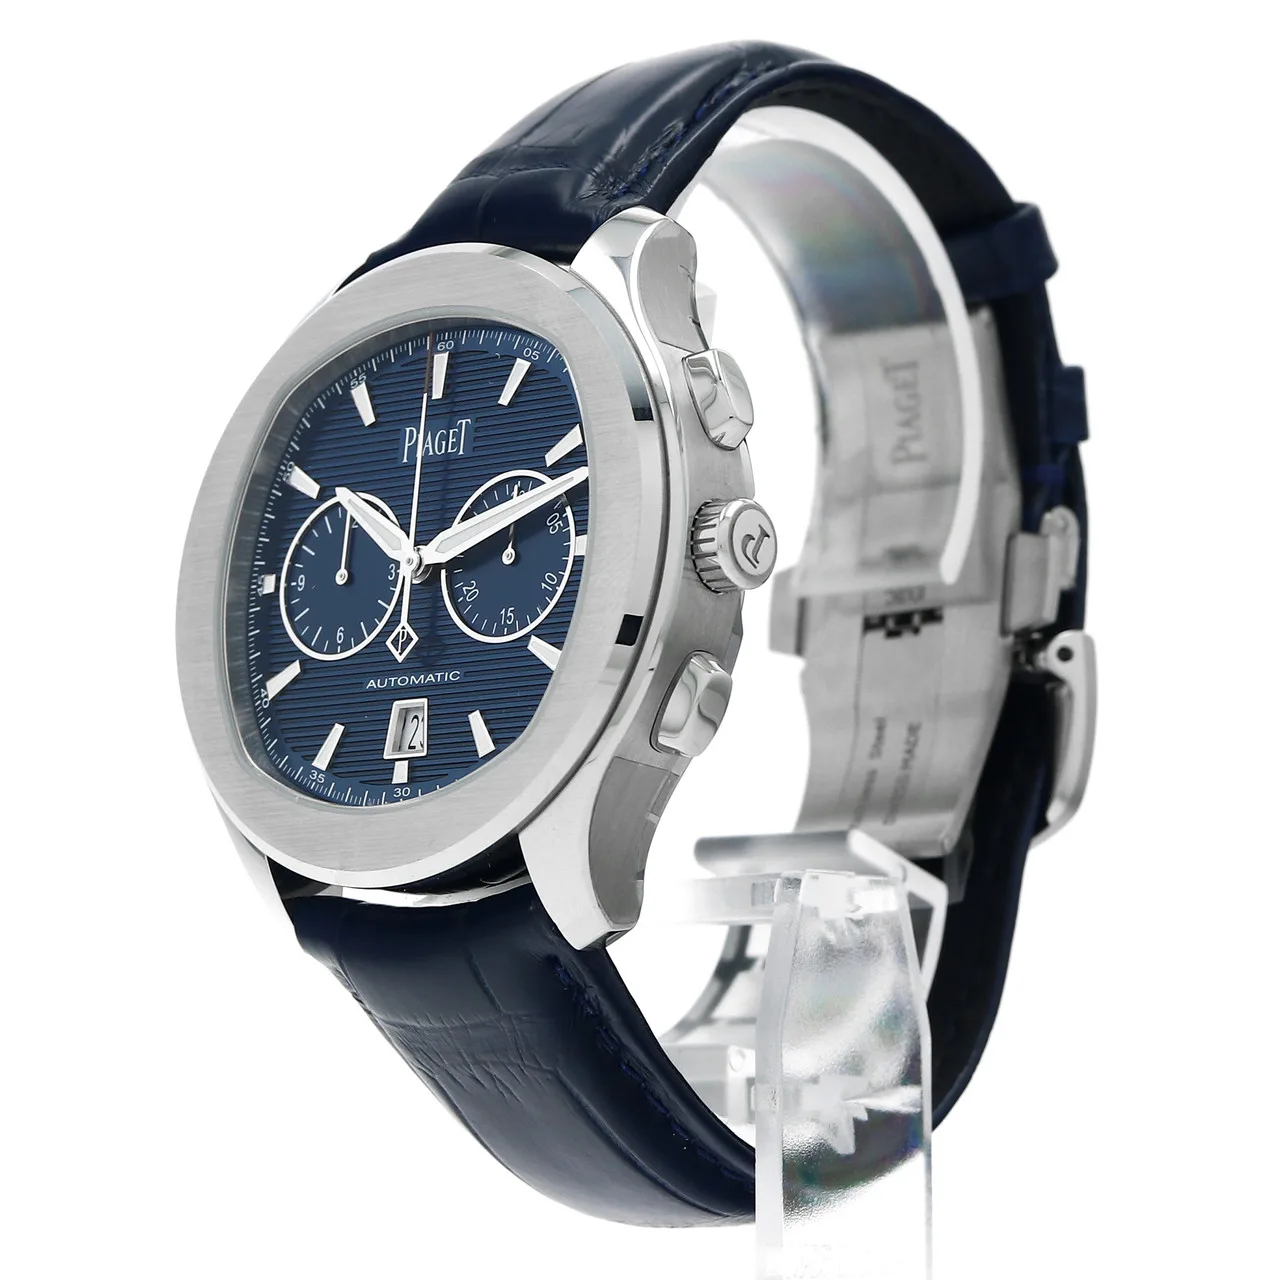 2022 Piaget Polo S Steel / Blue / Strap G0A43002  Listing Image 2